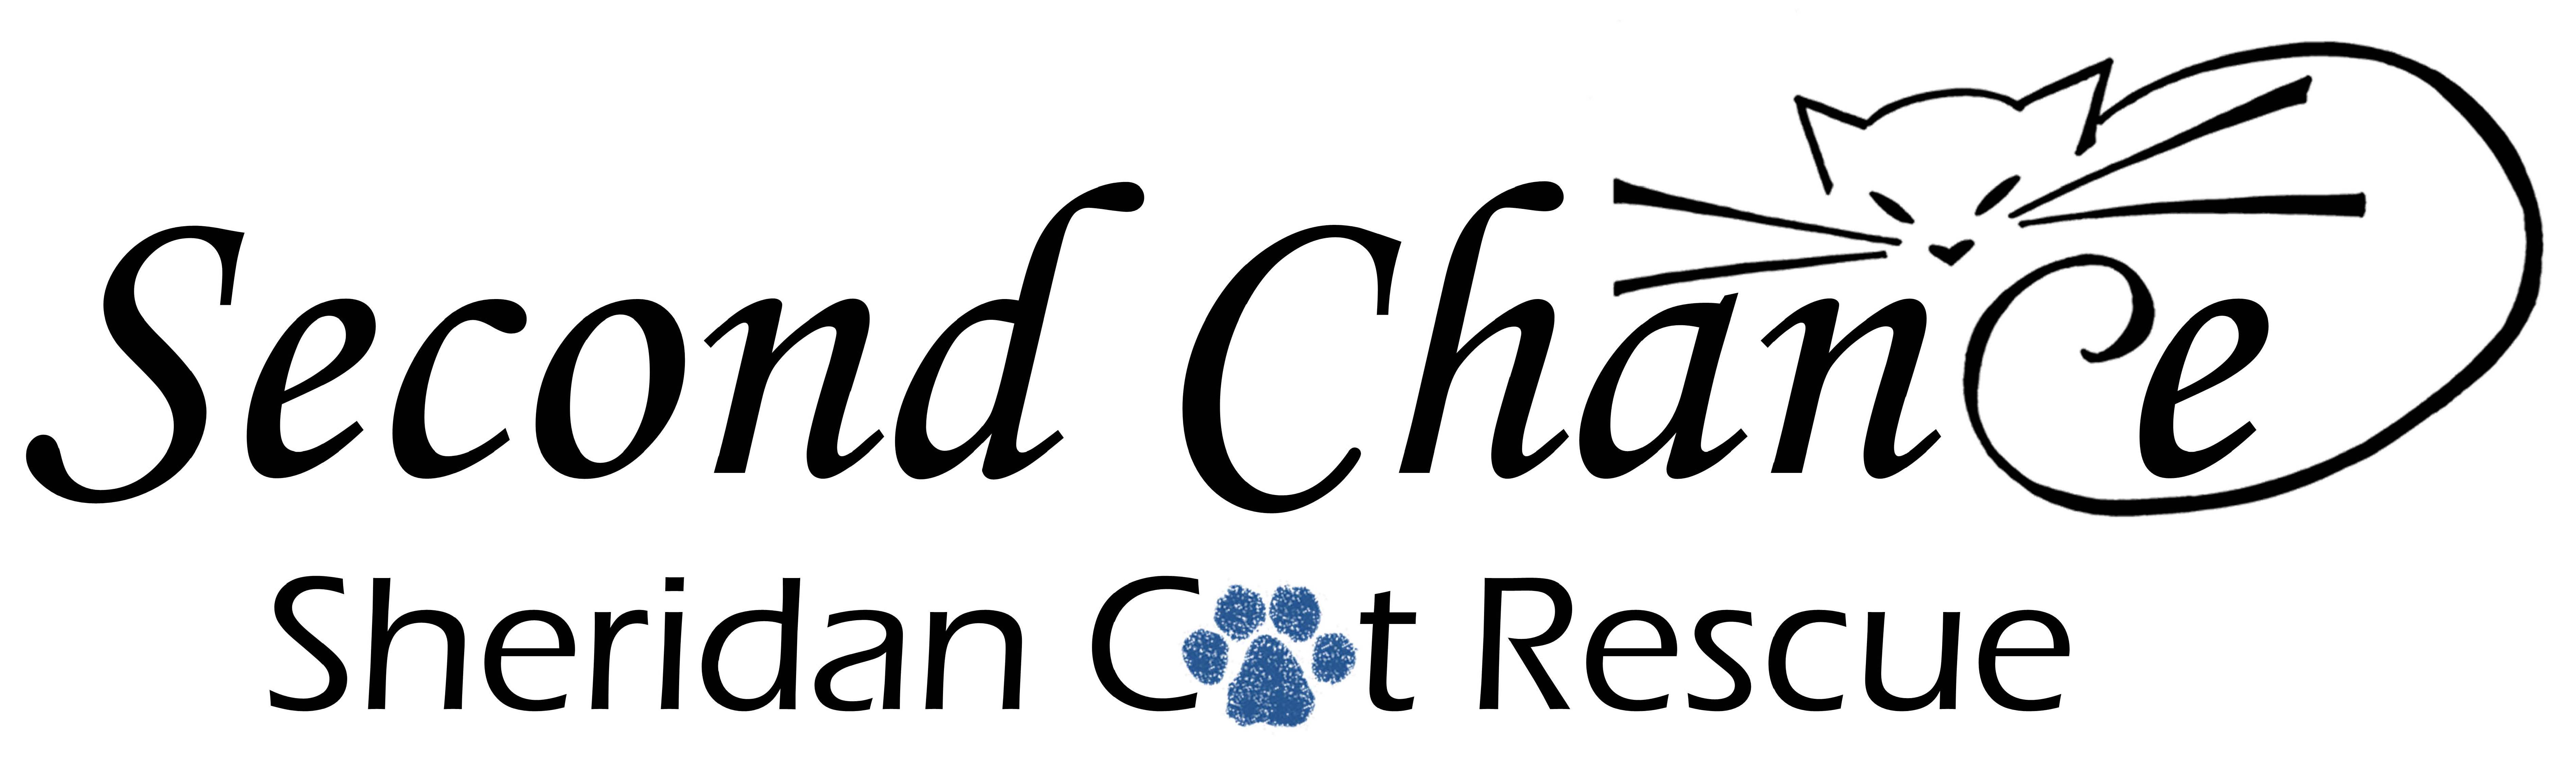 Second Chance Sheridan Cat Rescue